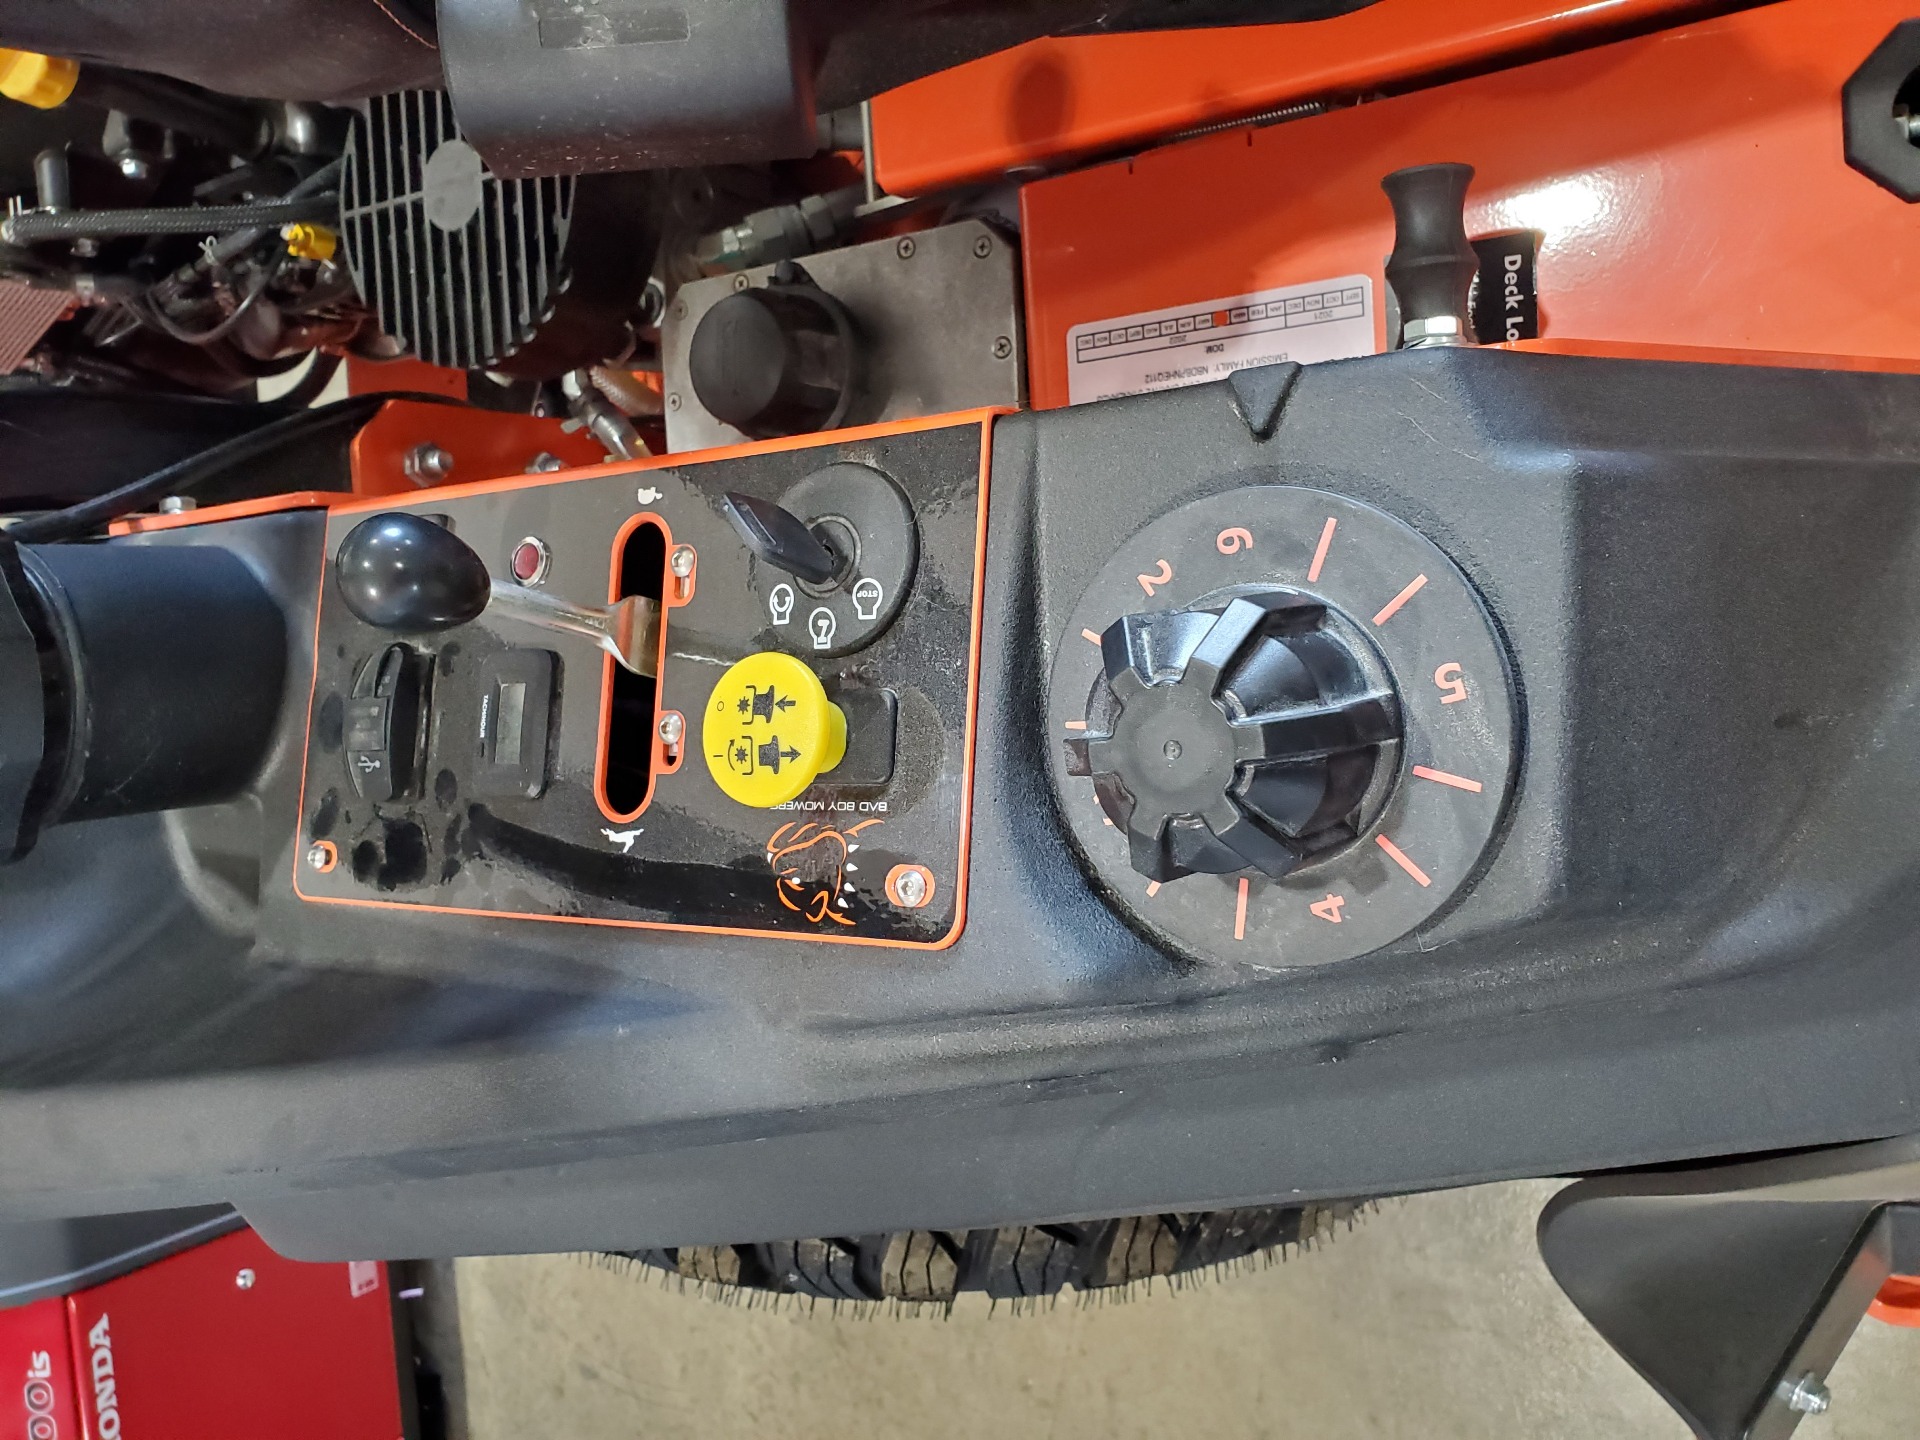 2021 Bad Boy Mowers Rogue 61 in. Yamaha EFI 33 hp in Winchester, Tennessee - Photo 5